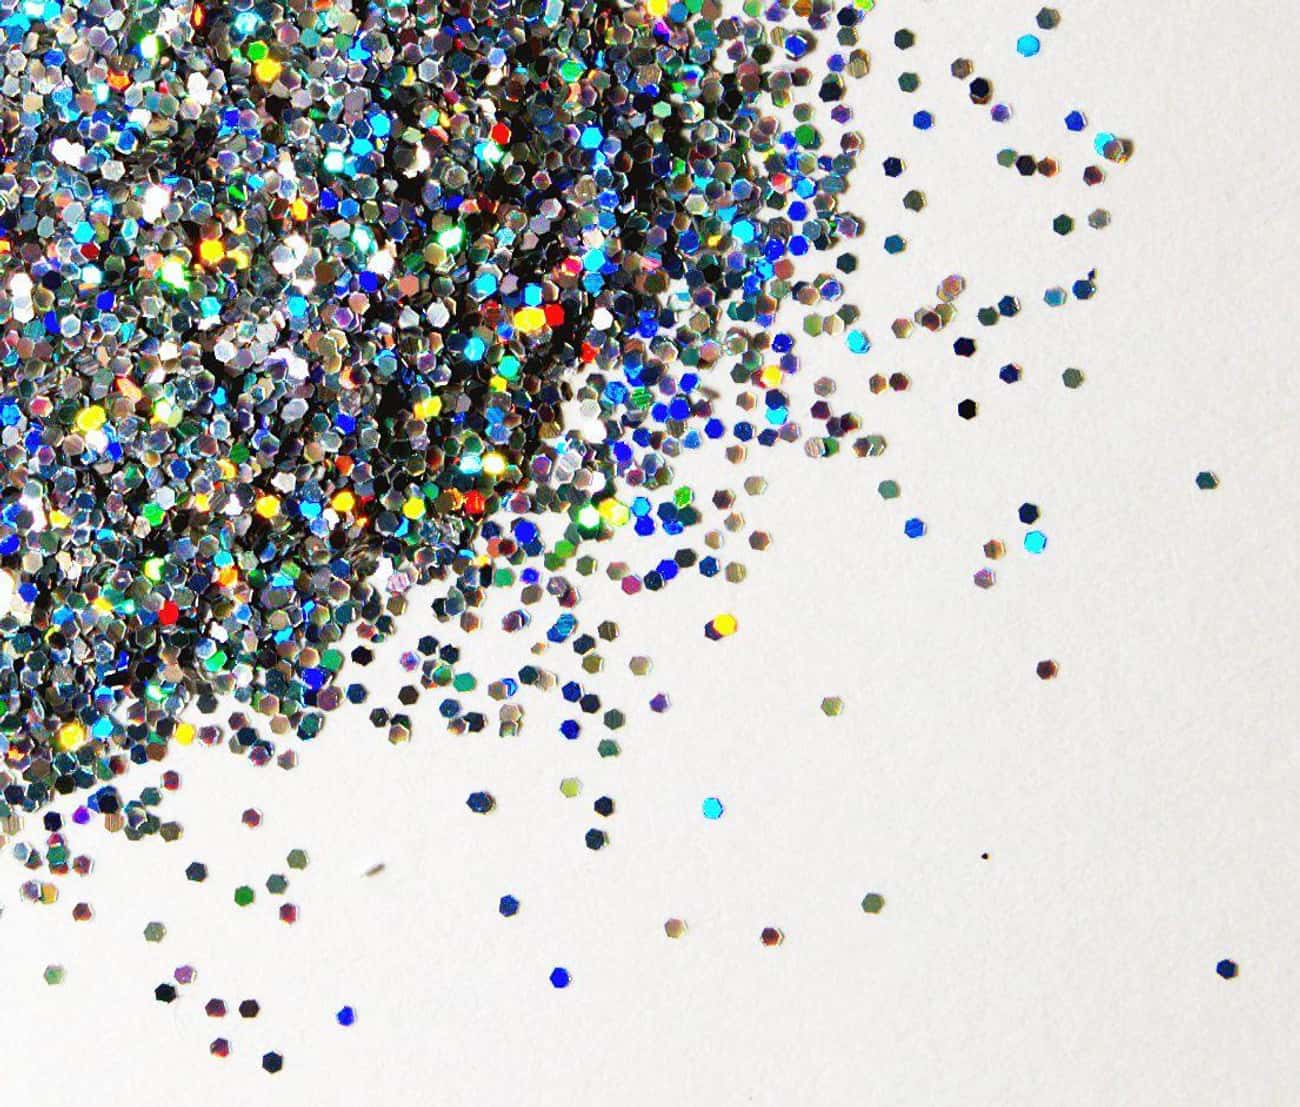 Who's Buying All The Glitter?